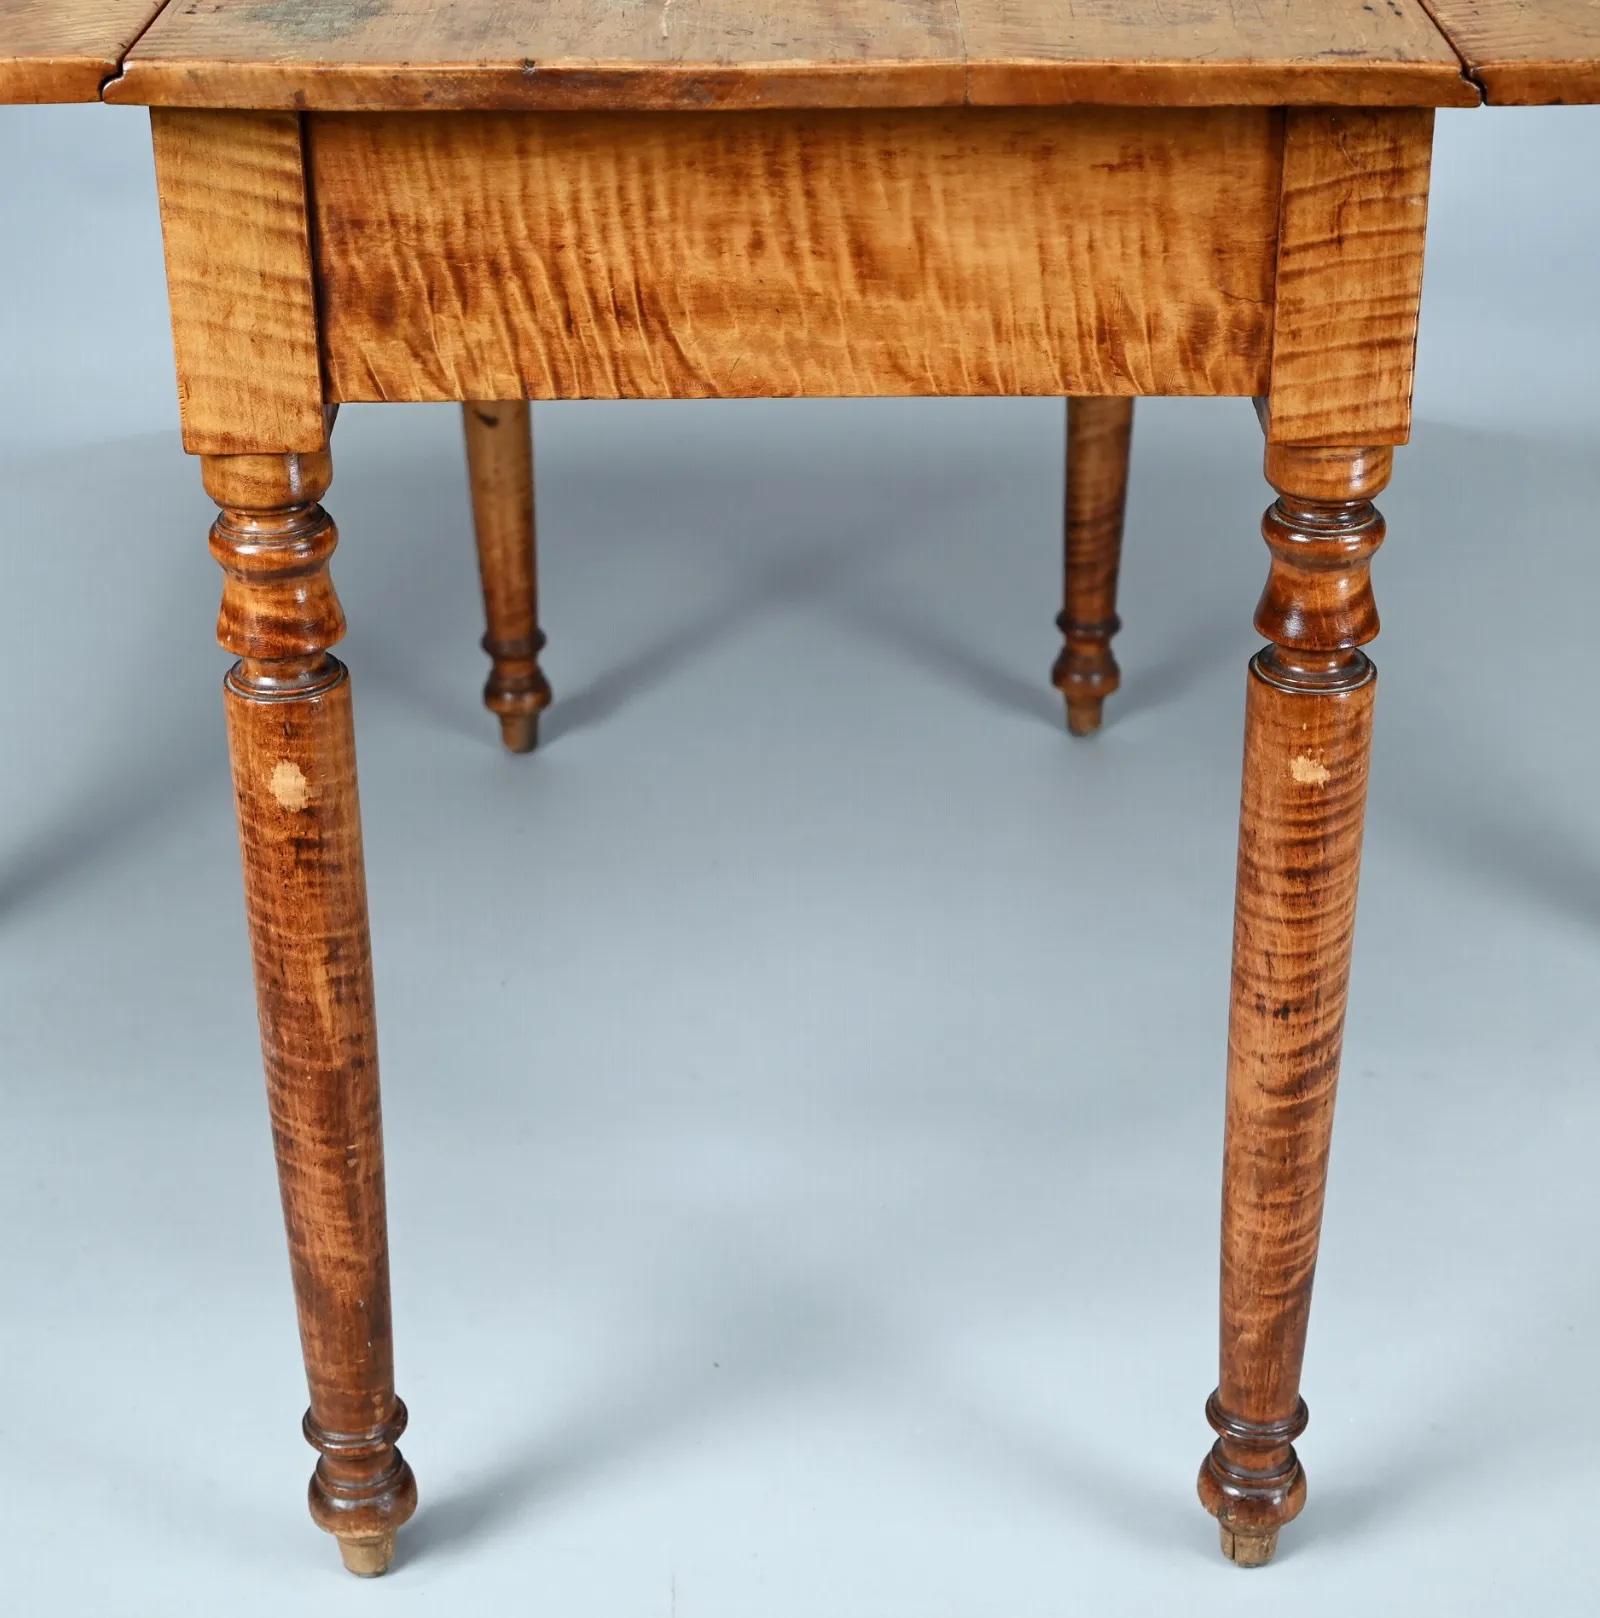 Early 19th Century American Sheraton Tiger Maple Drop Leaf Dining Table In Good Condition For Sale In Essex, MA